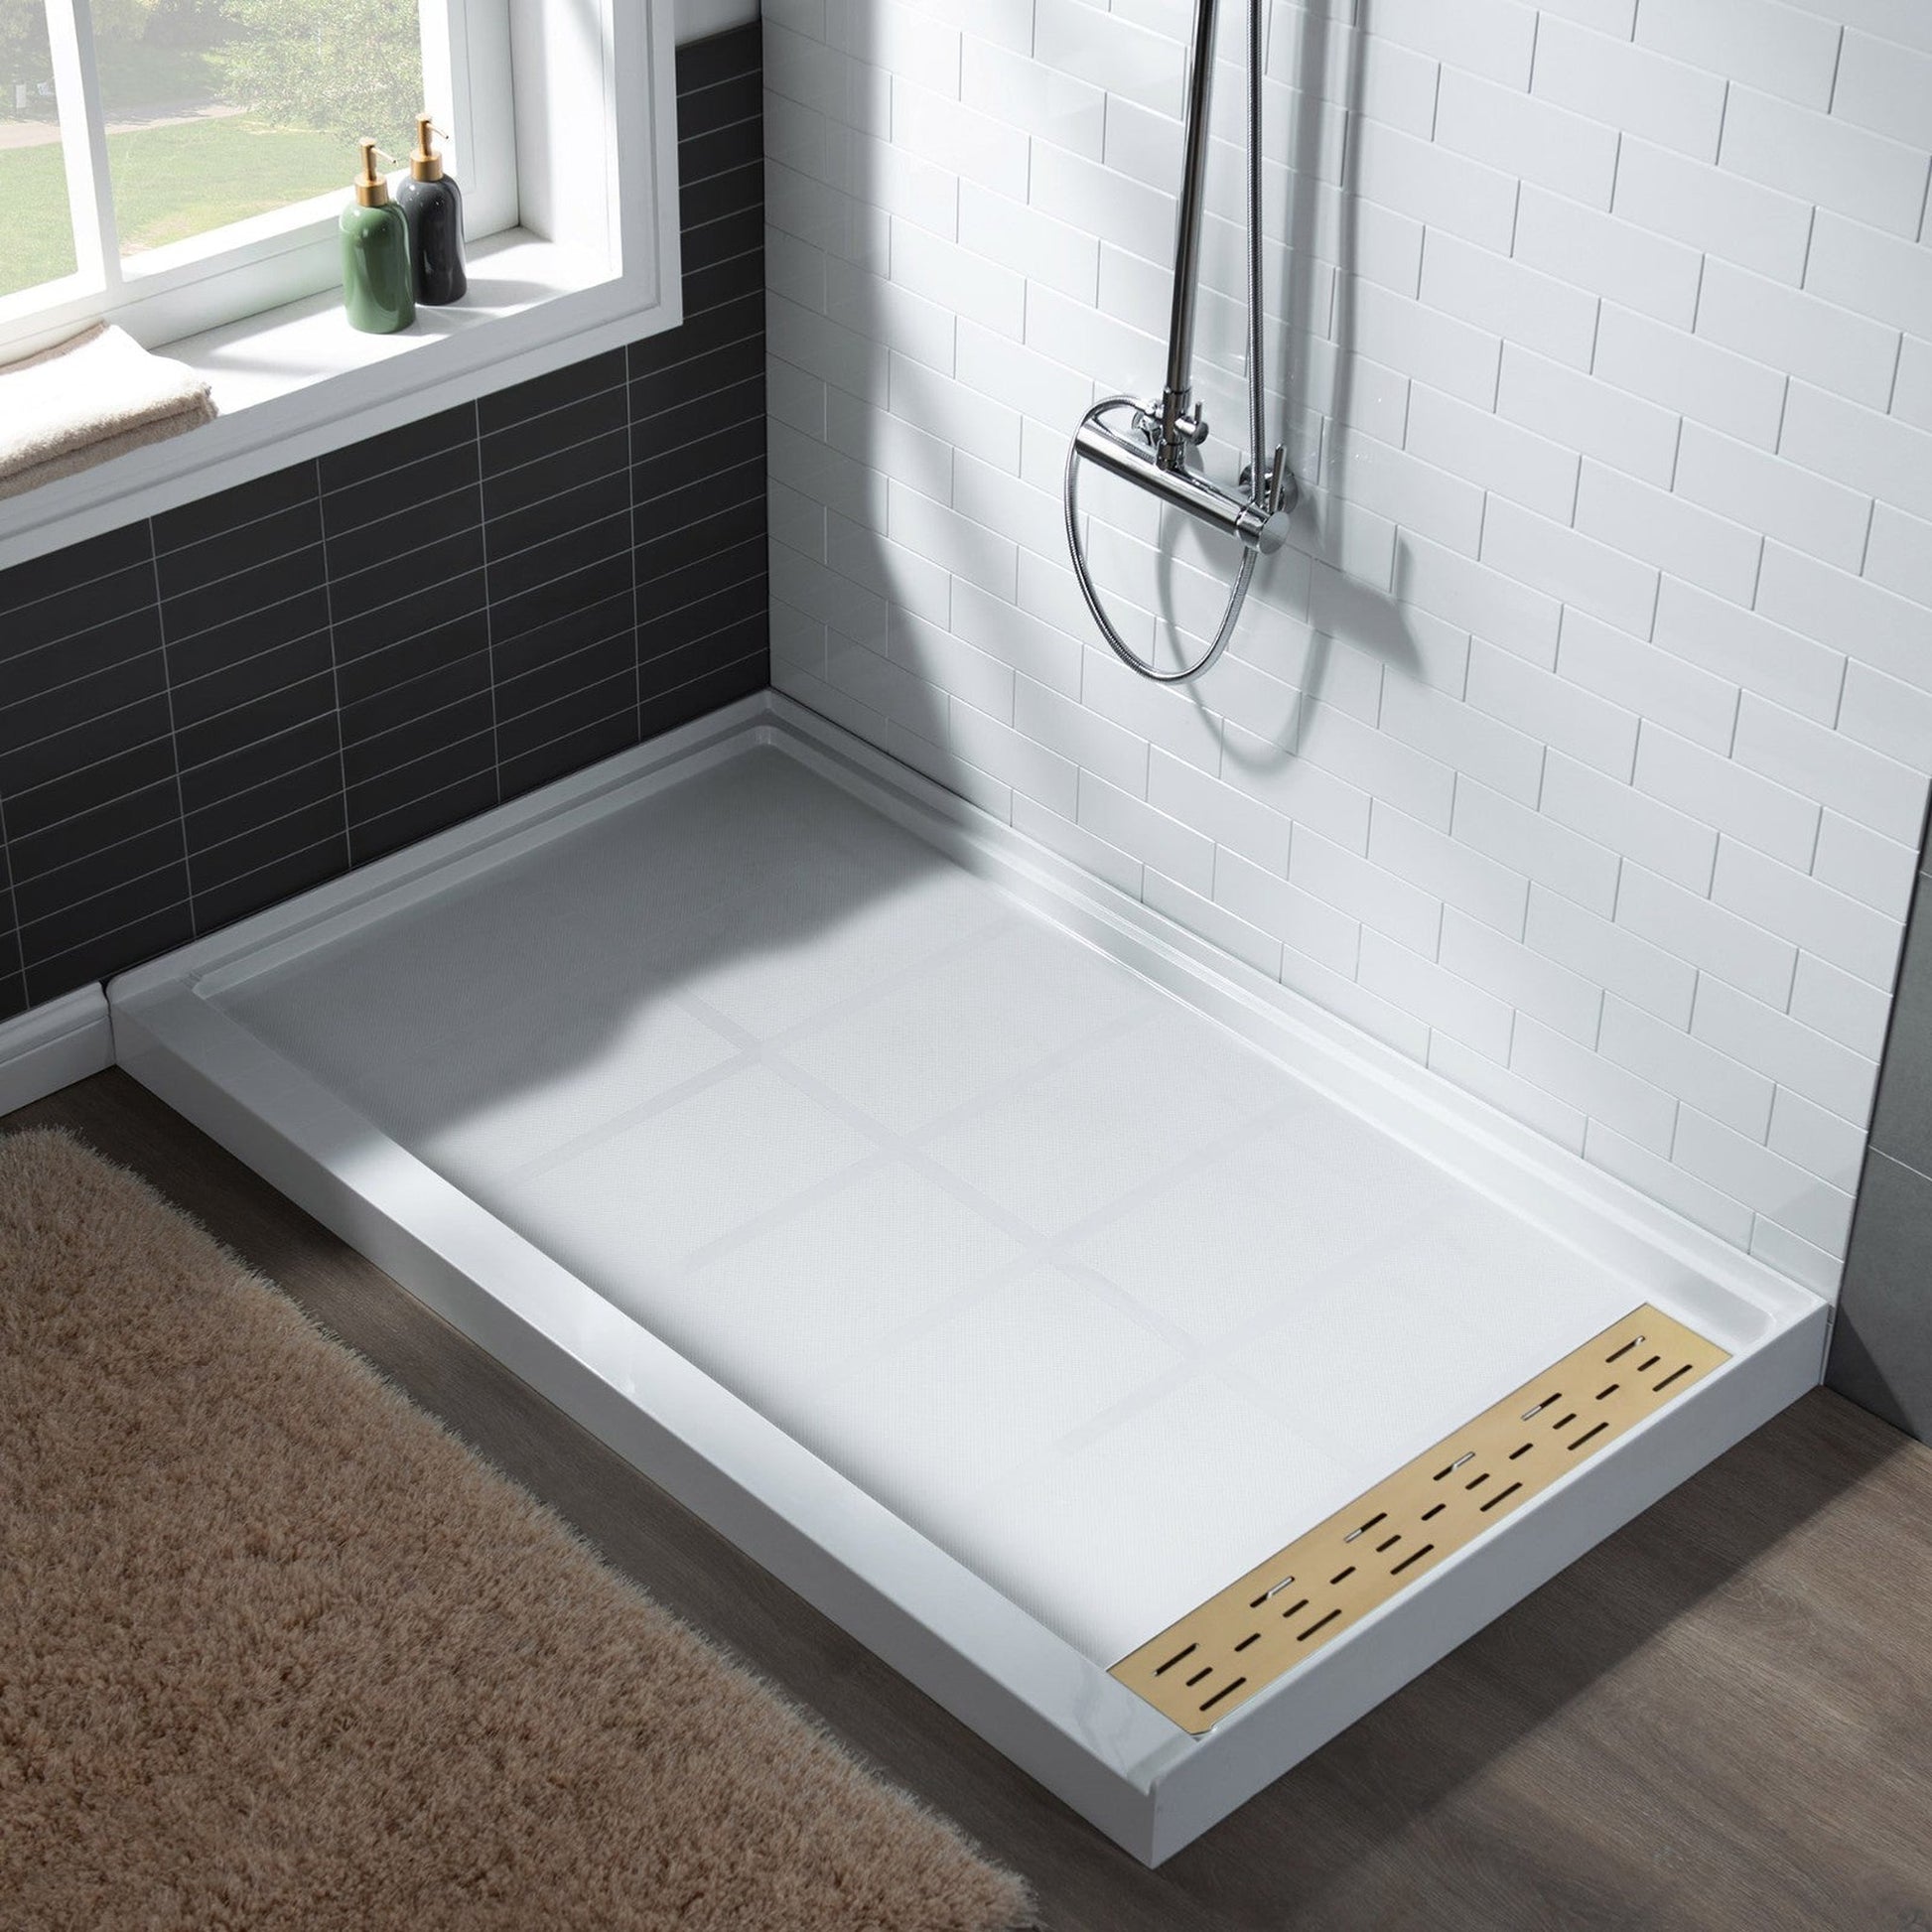 WoodBridge 60" x 32" White Solid Surface Shower Base Right Drain Location With Brushed Gold Trench Drain Cover